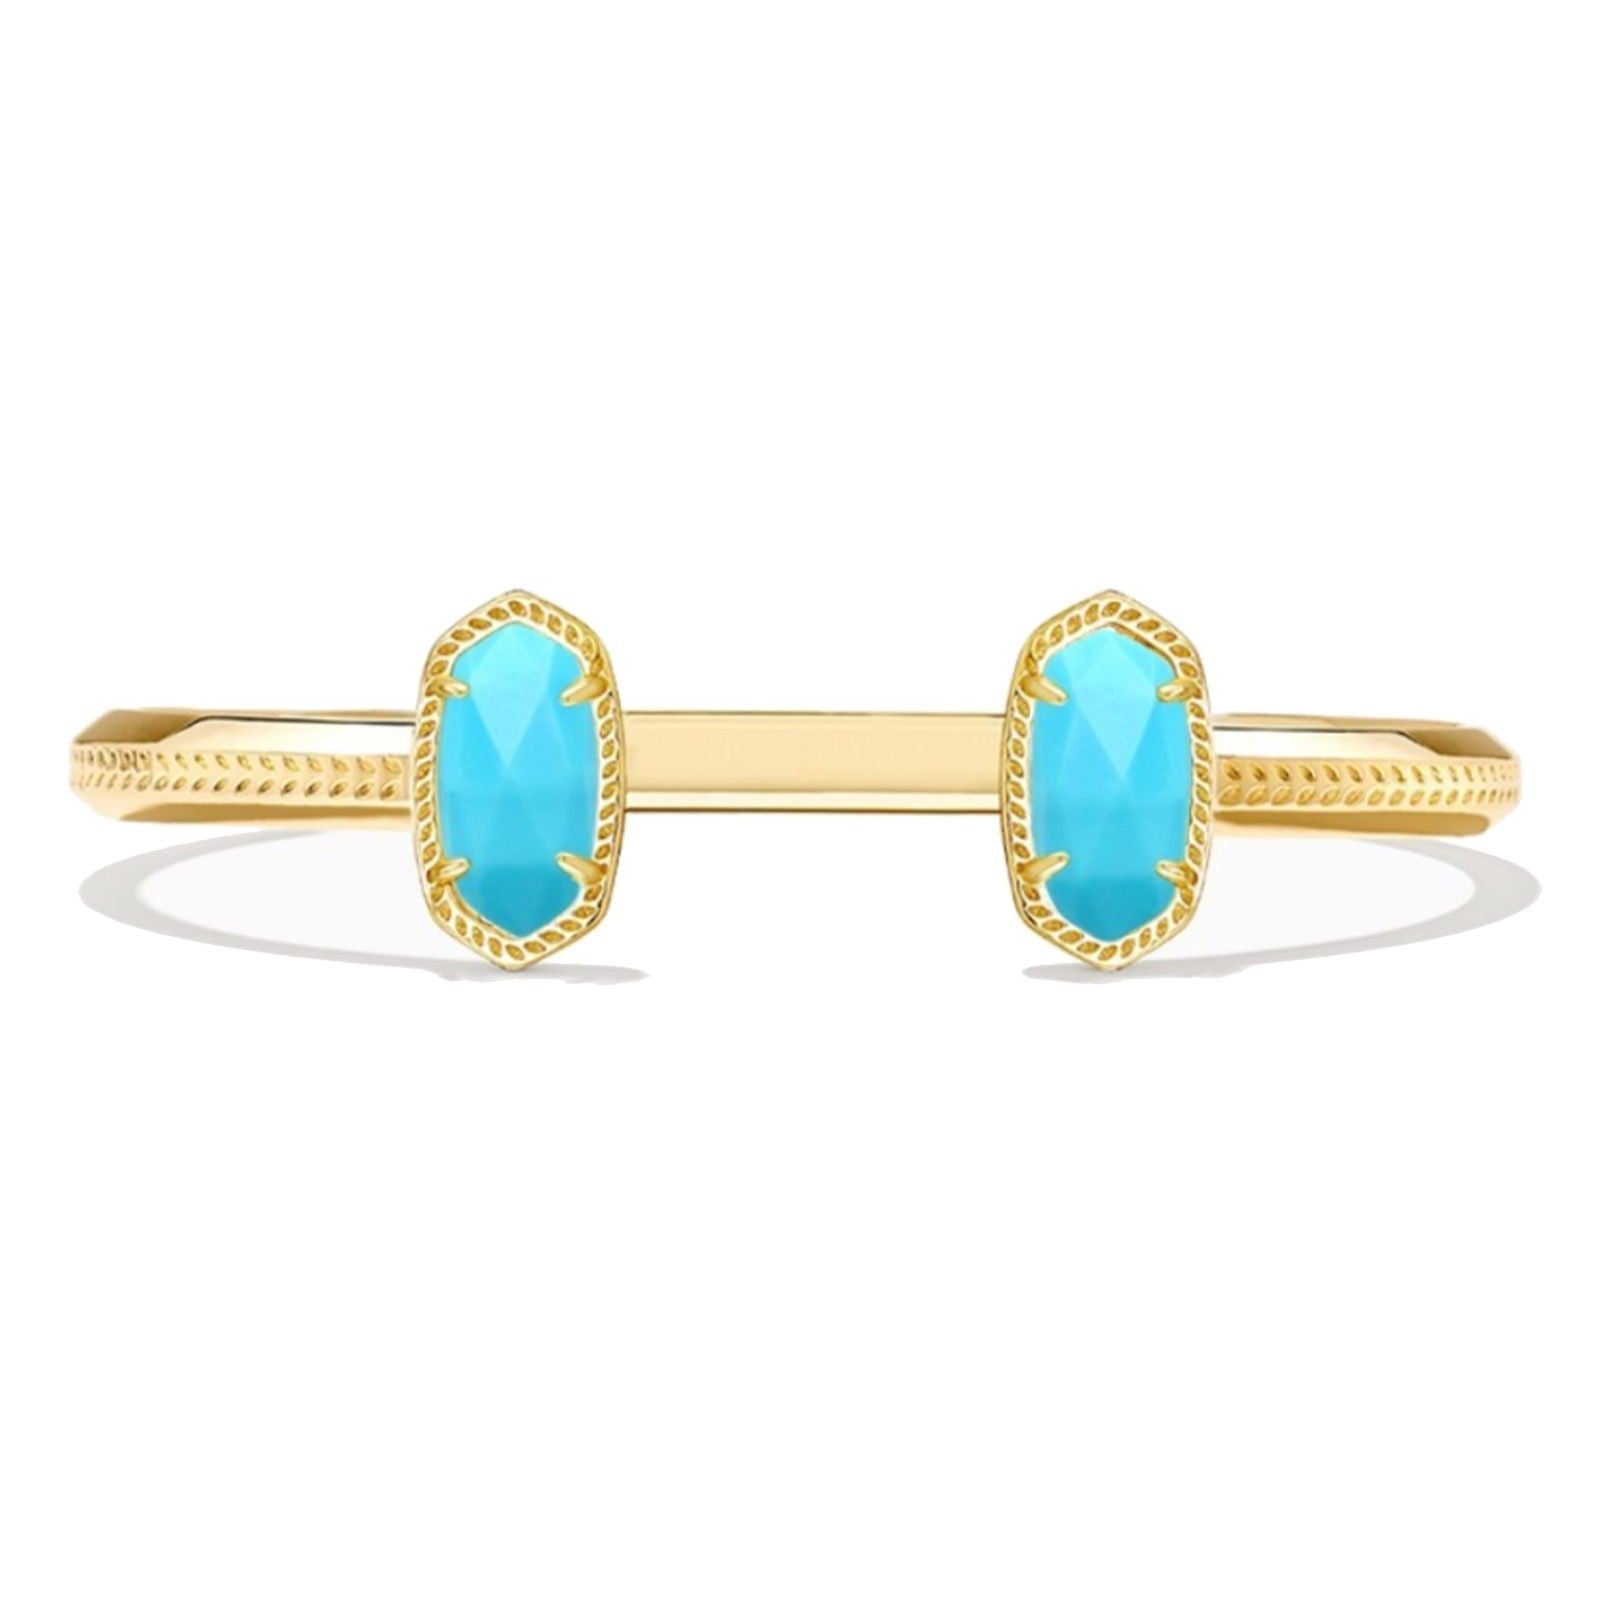 Kendra Scott | Elton Gold Cuff Bracelet in Variegated Turquoise Magnesite - Giddy Up Glamour Boutique